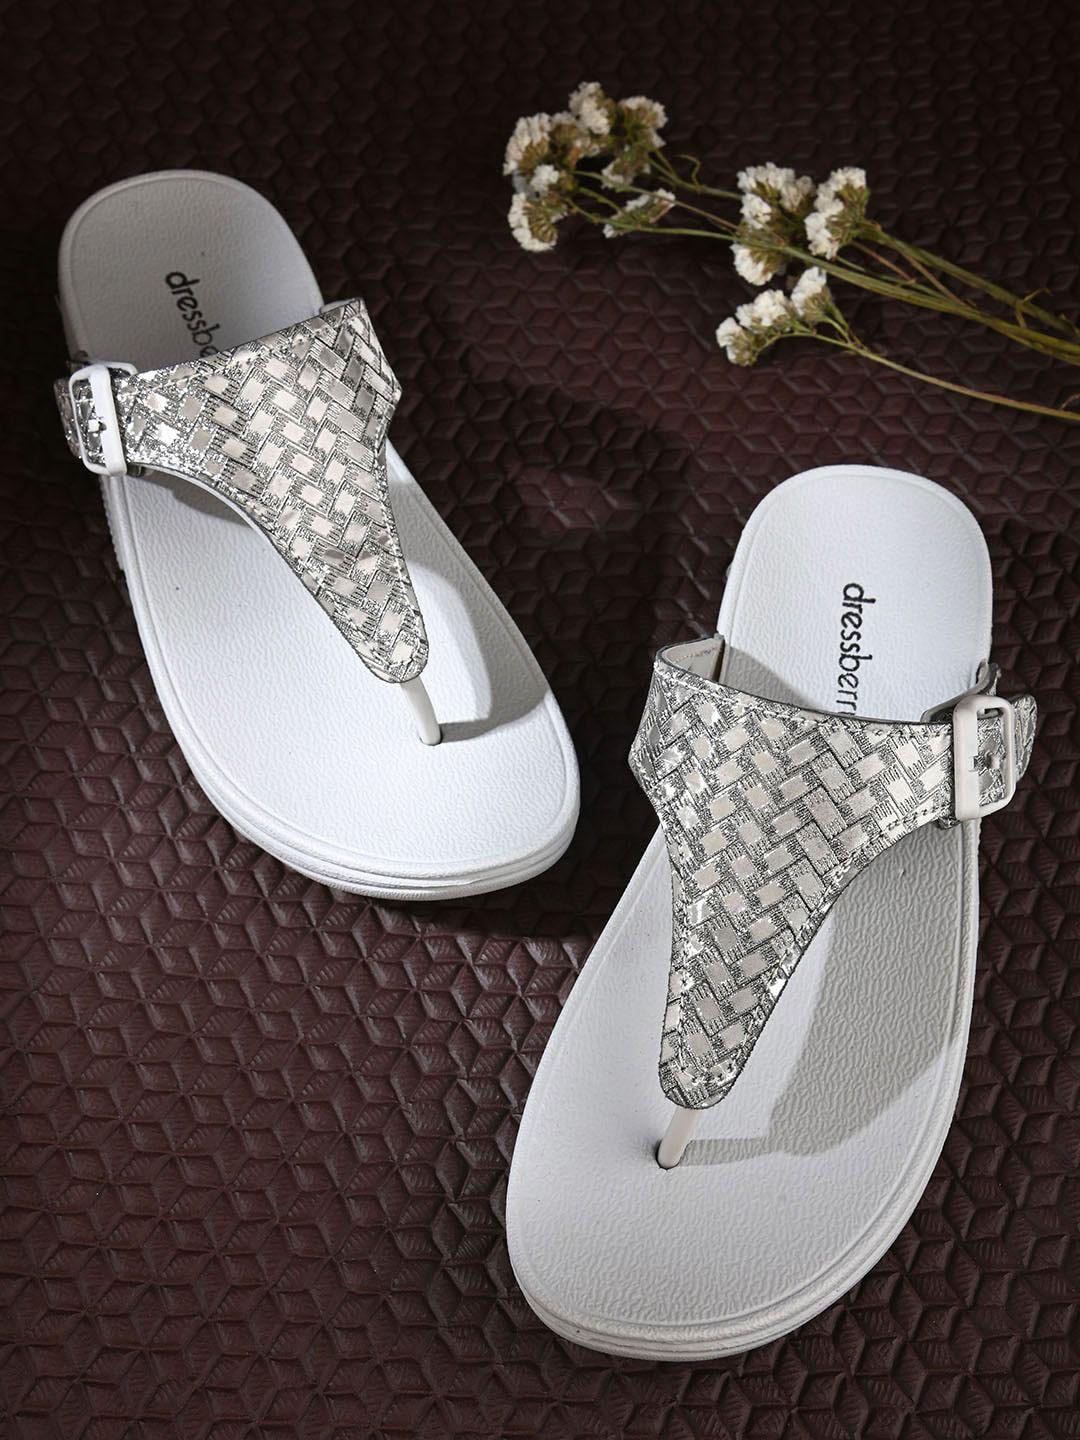 dressberry women white textured open toe flats with buckle detail